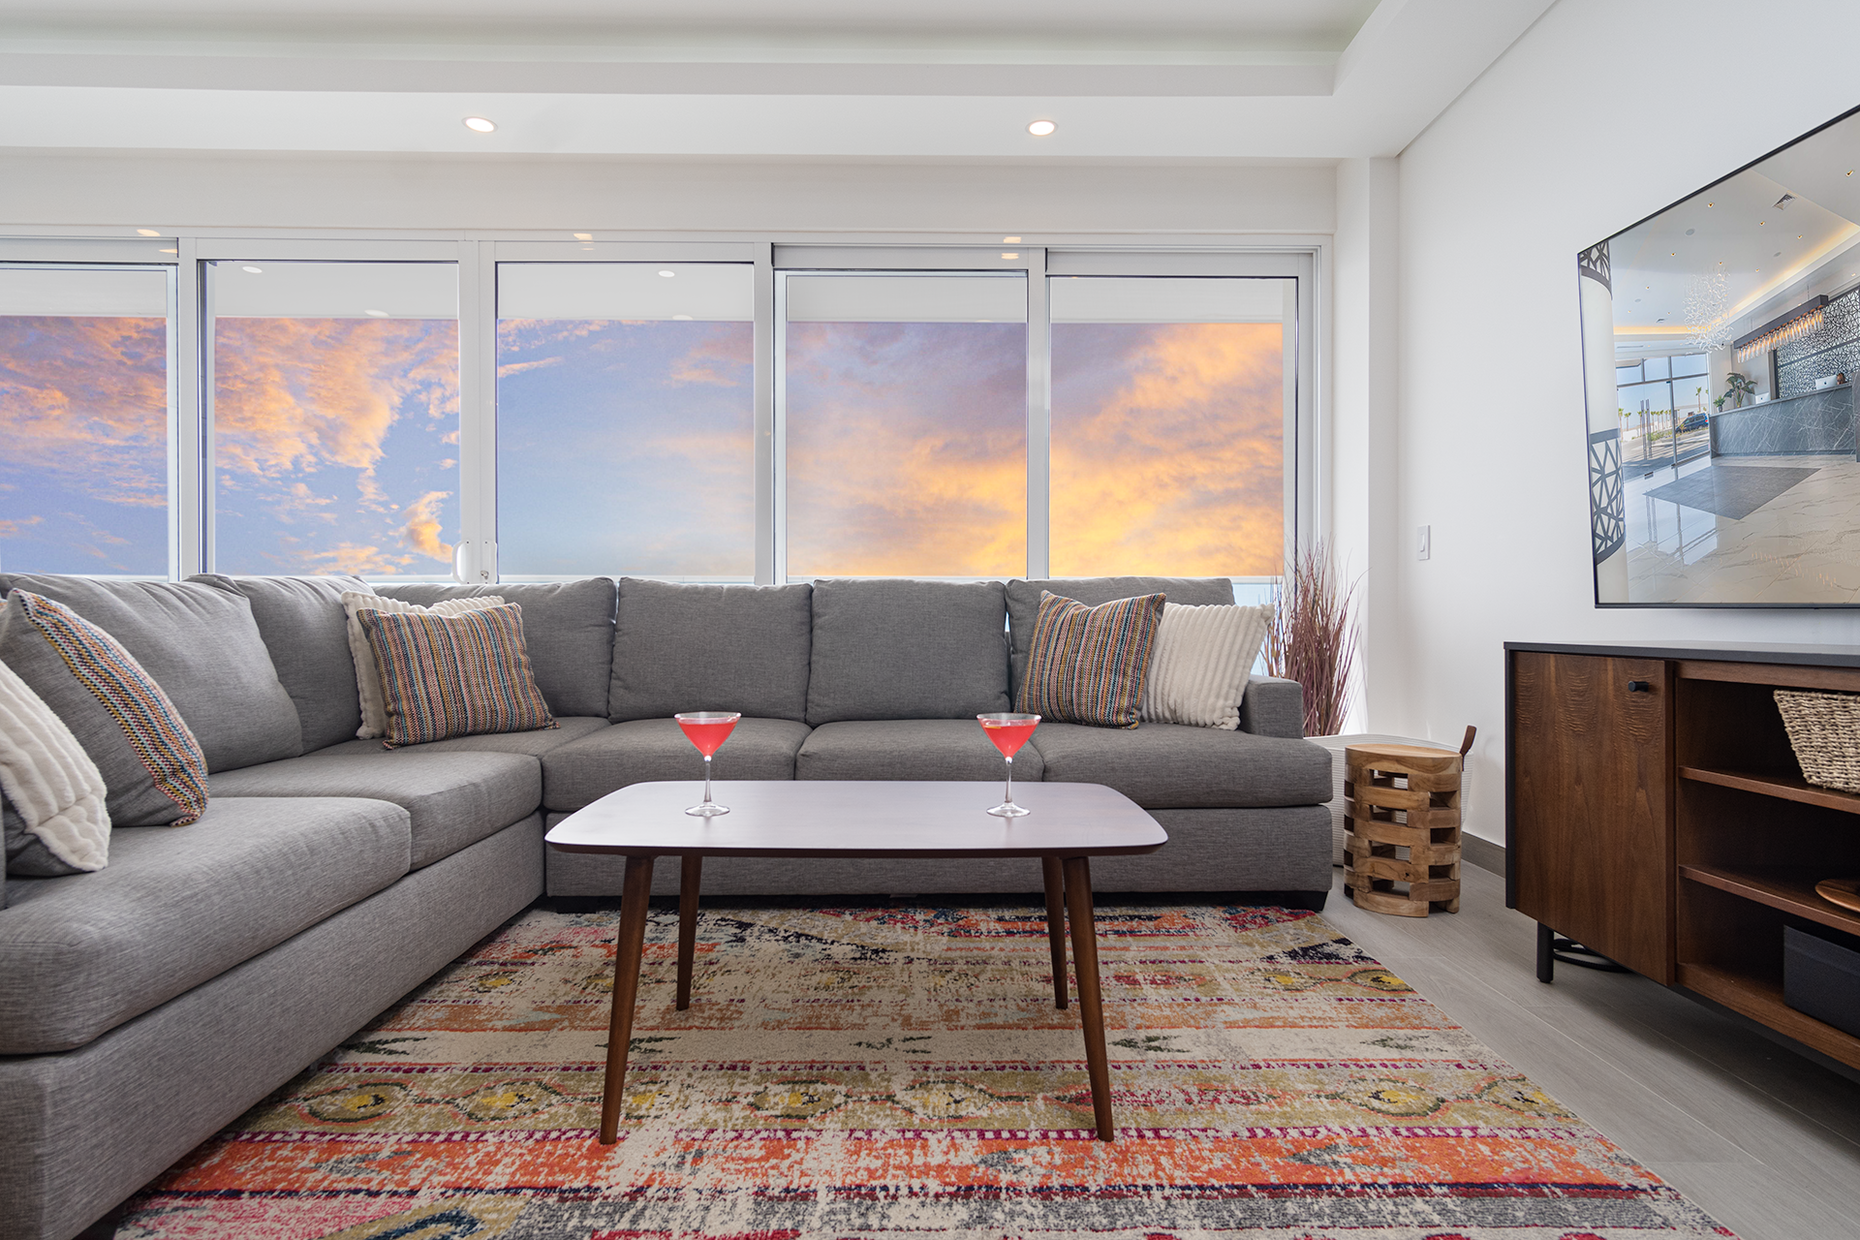 A flaming sunset lights up the living room seating area.